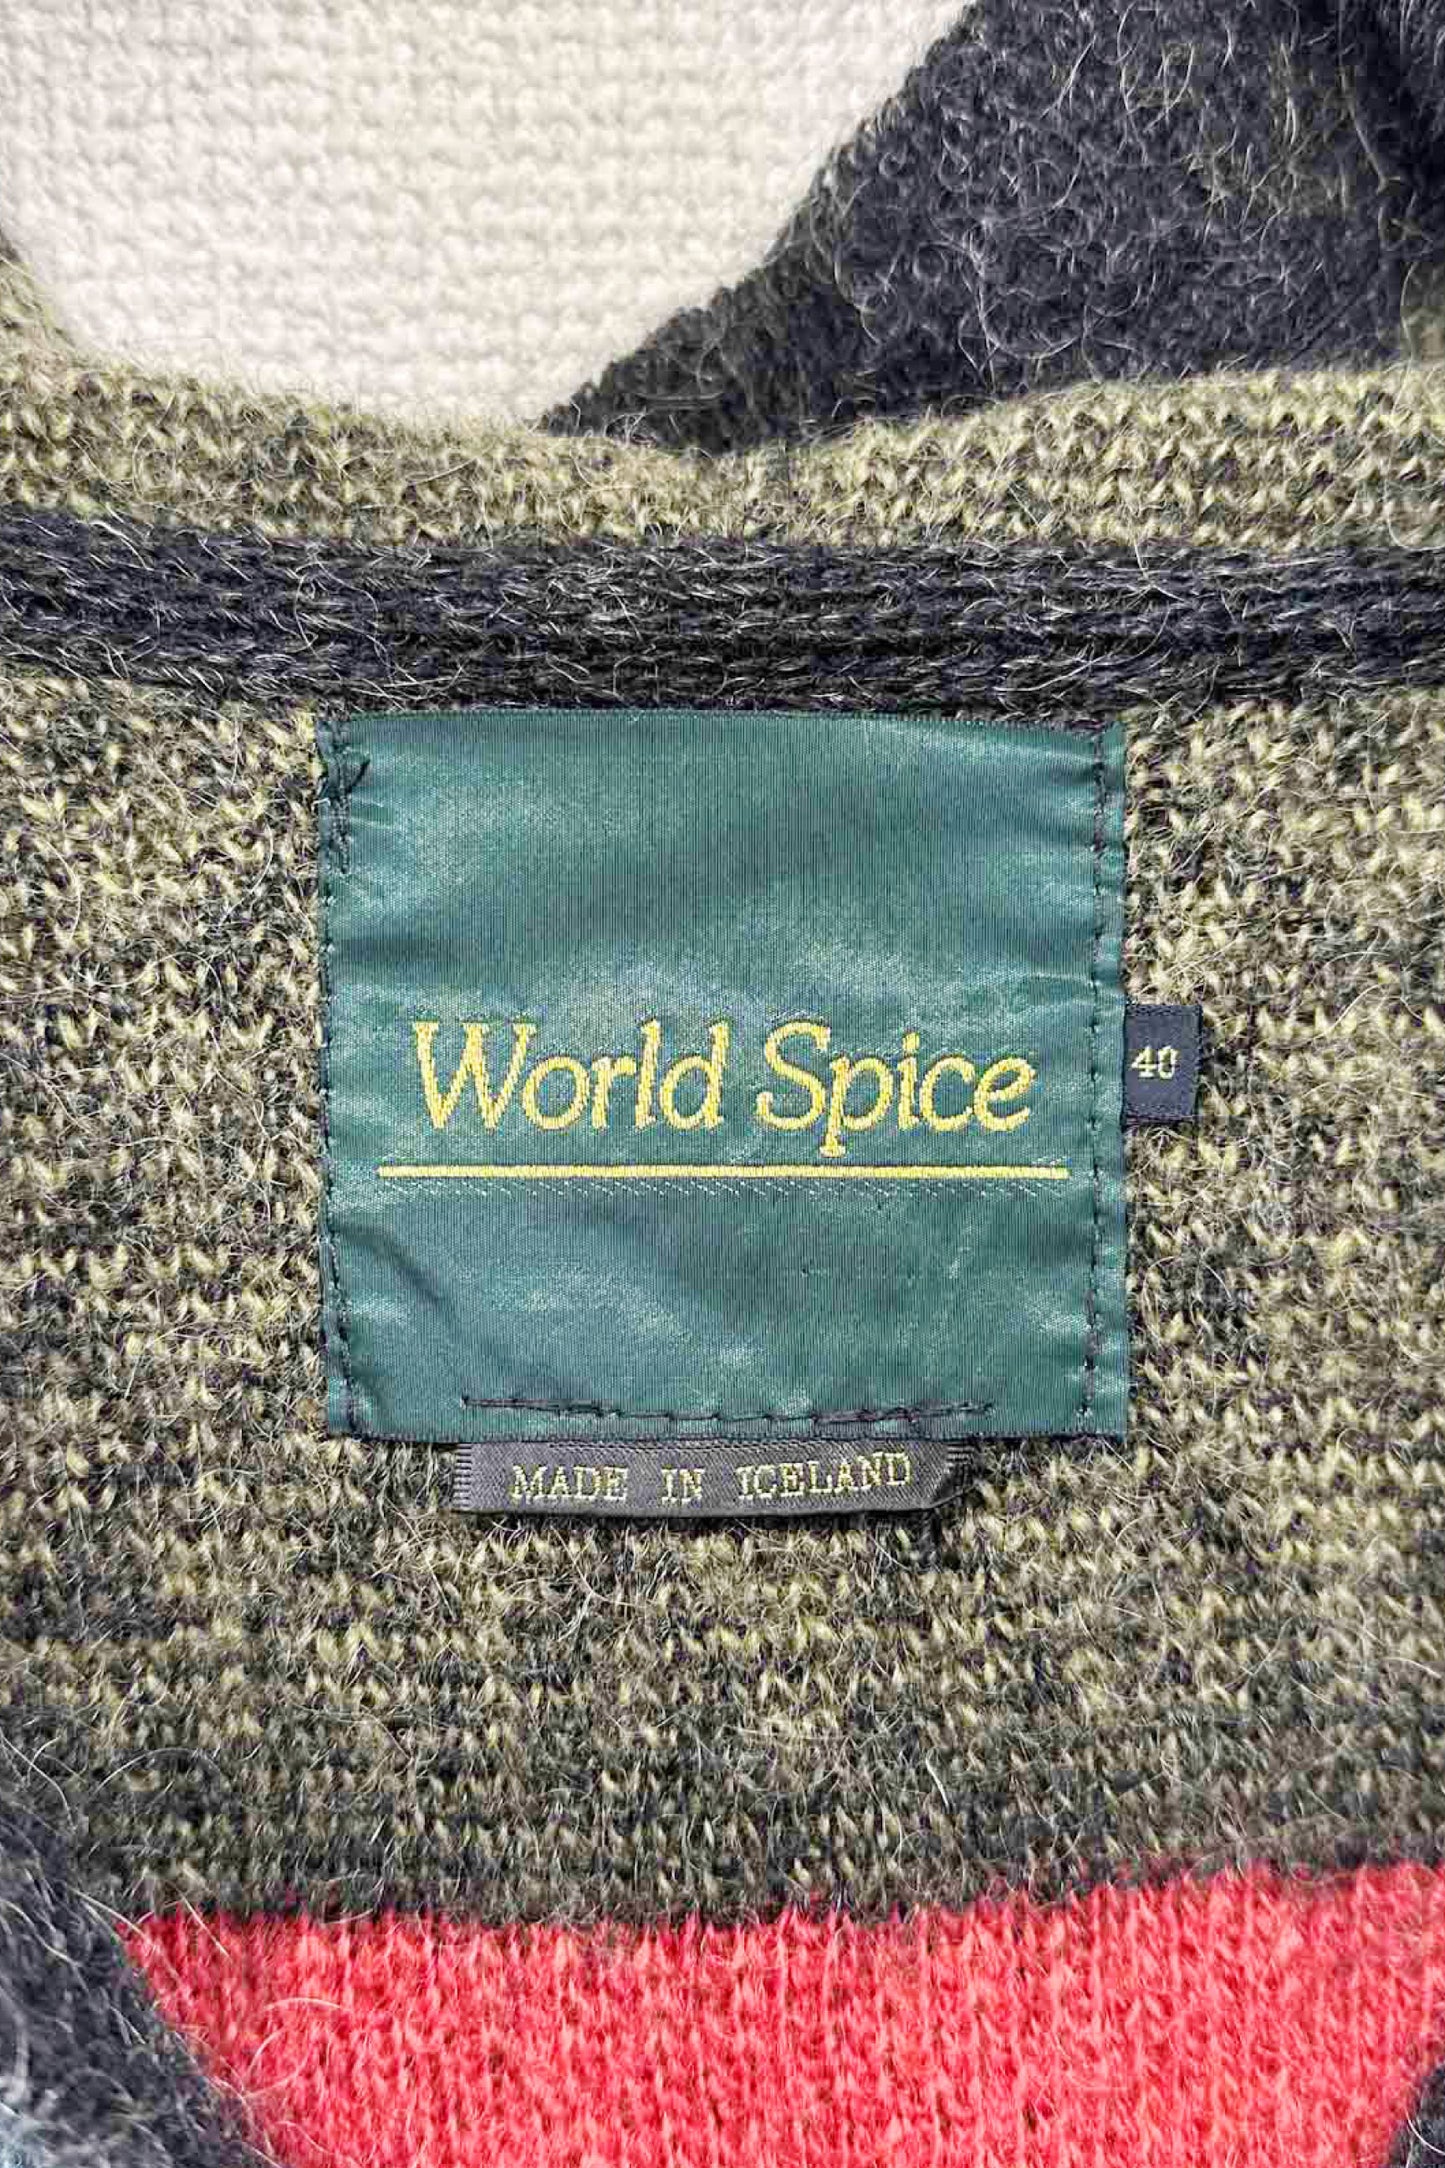 Made in Iceland World Spice cardigan